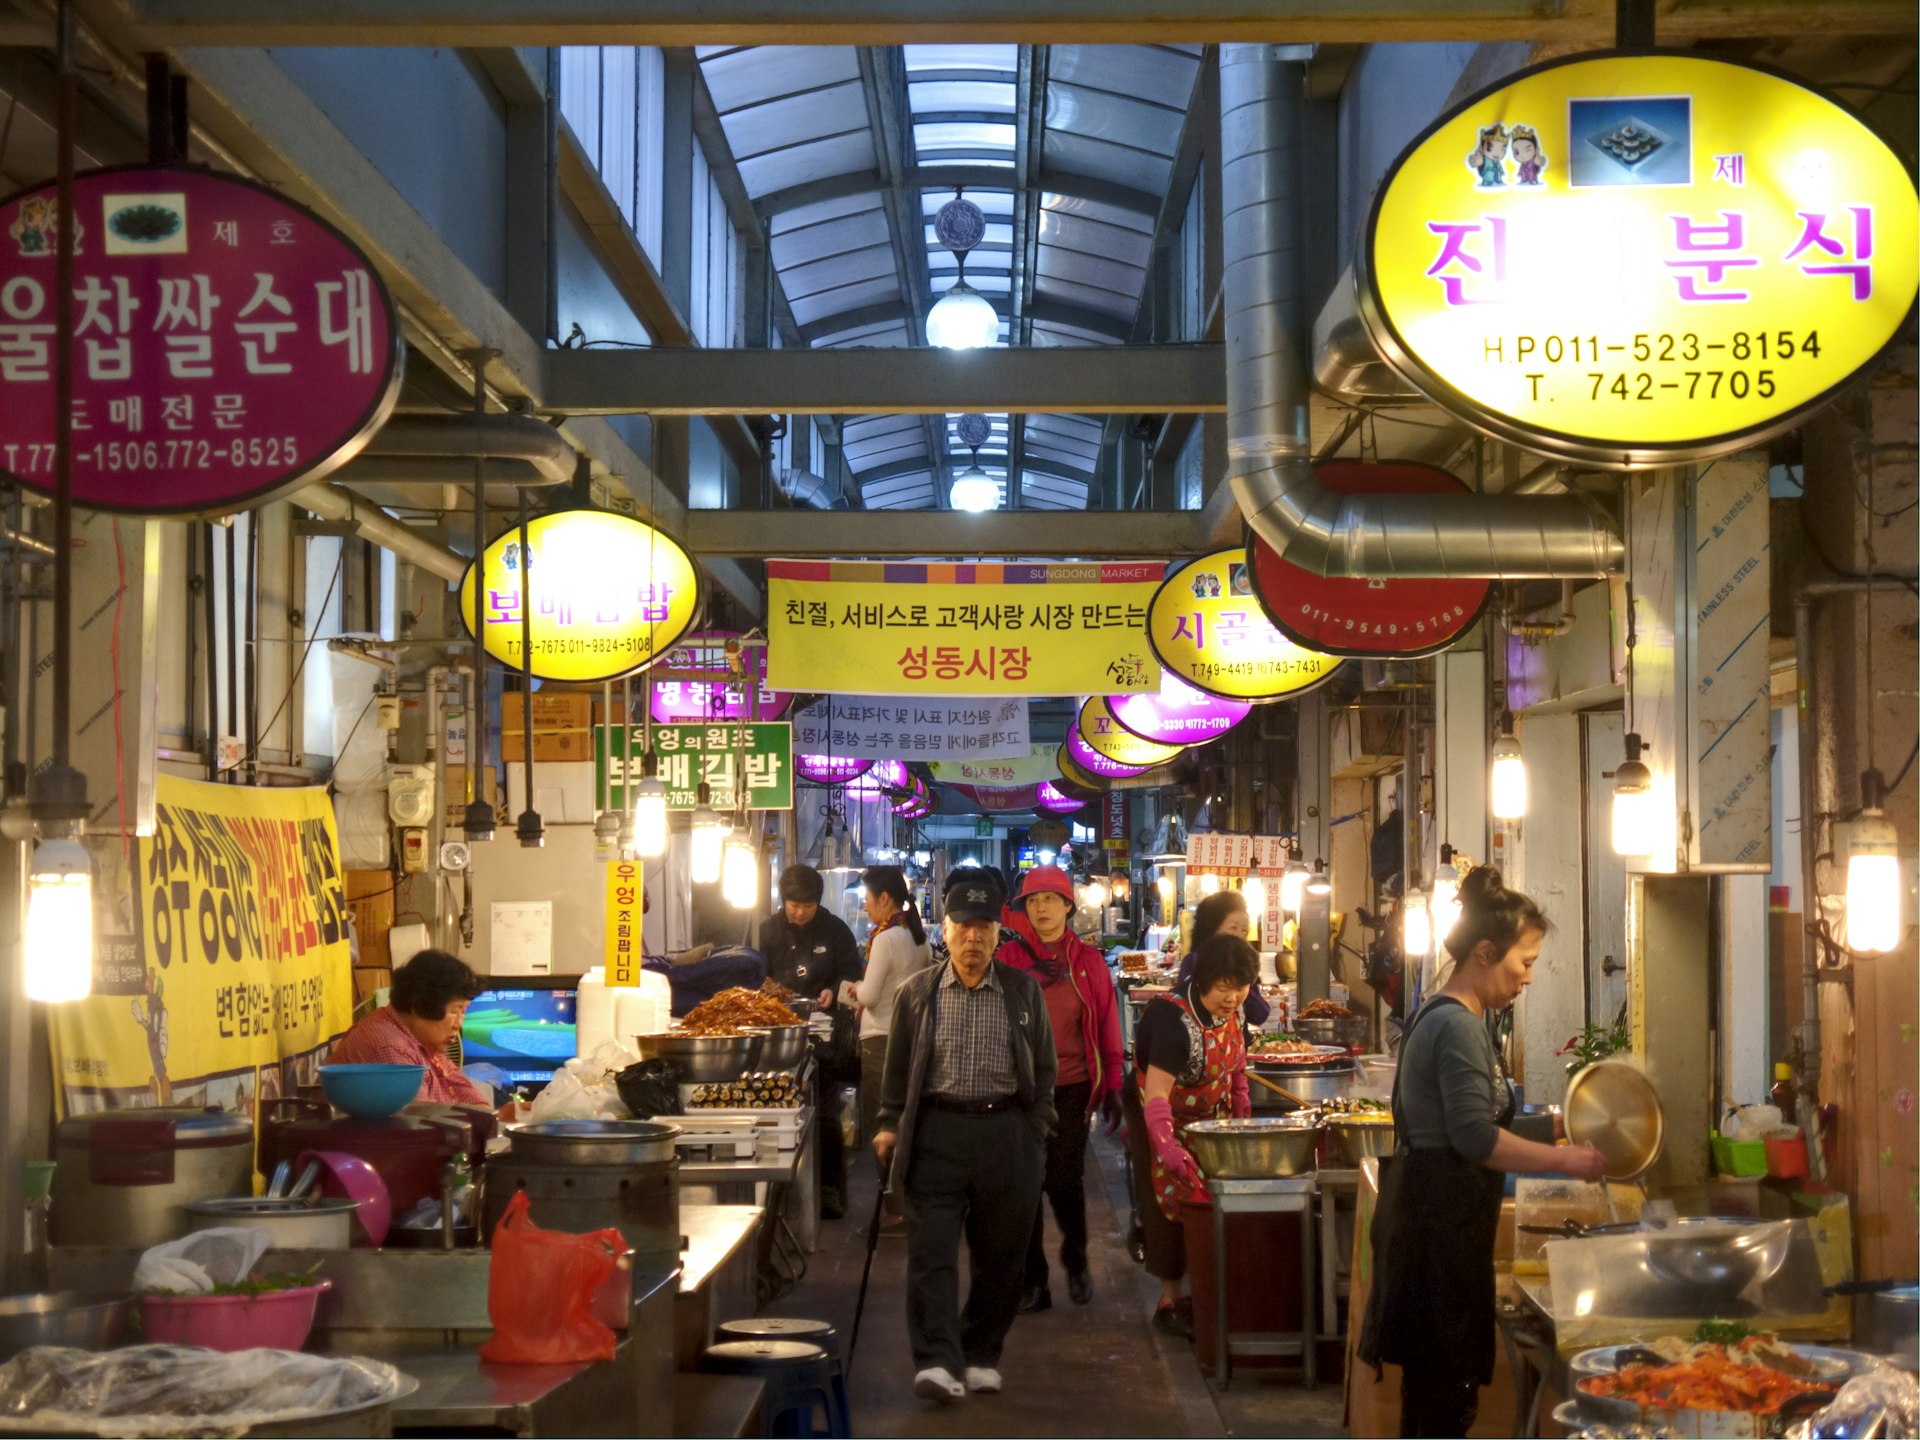 A local market prepares to open for the day in Gyeongju, South Korea